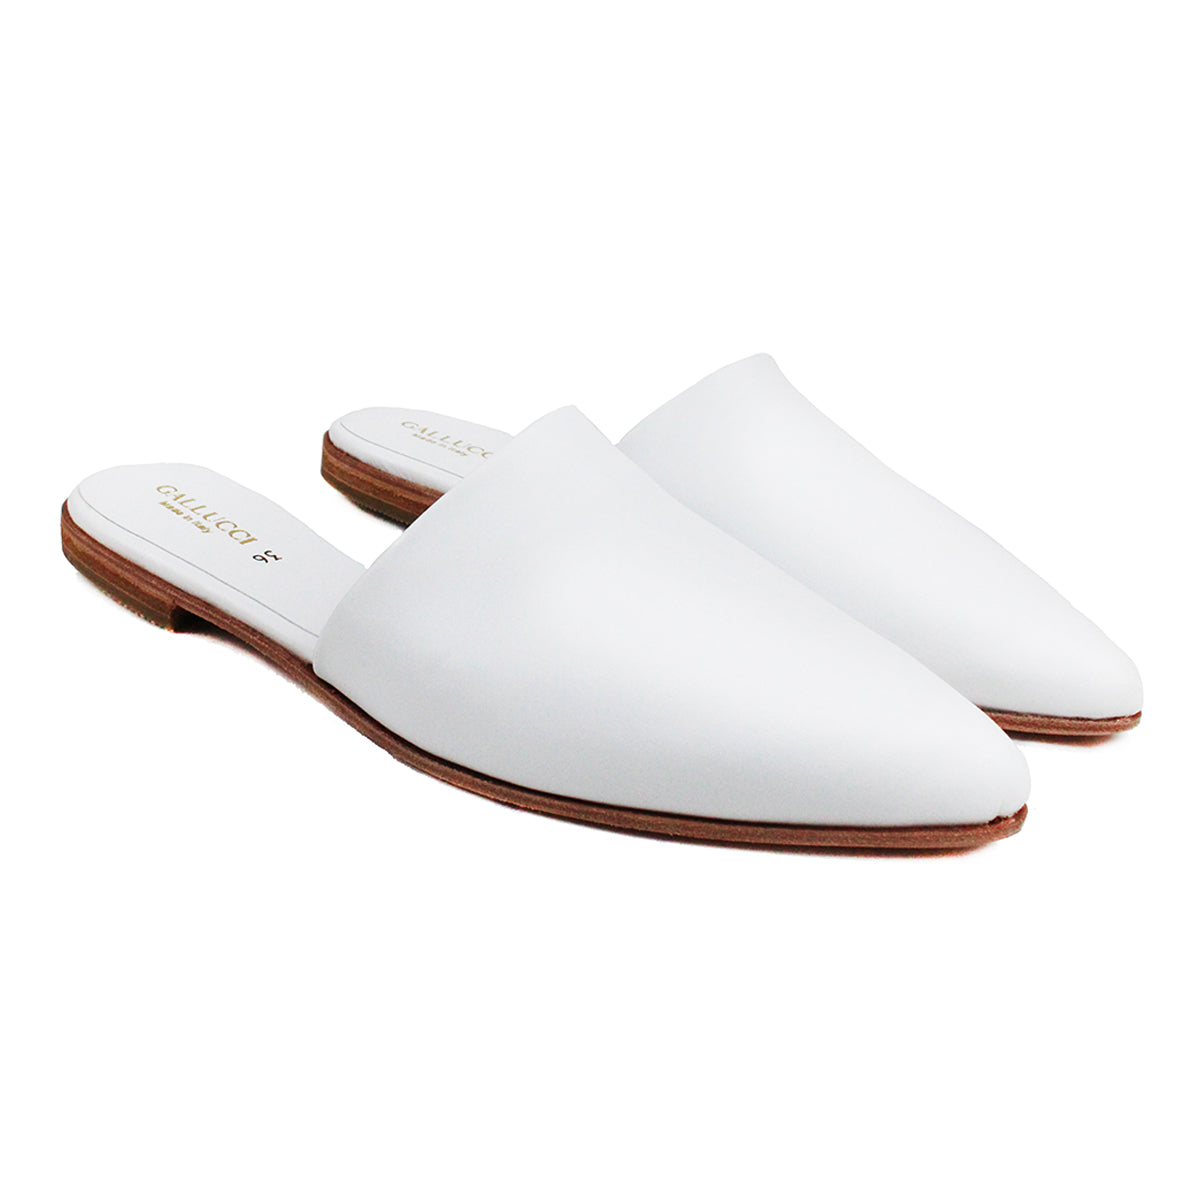 Sabot in white leather